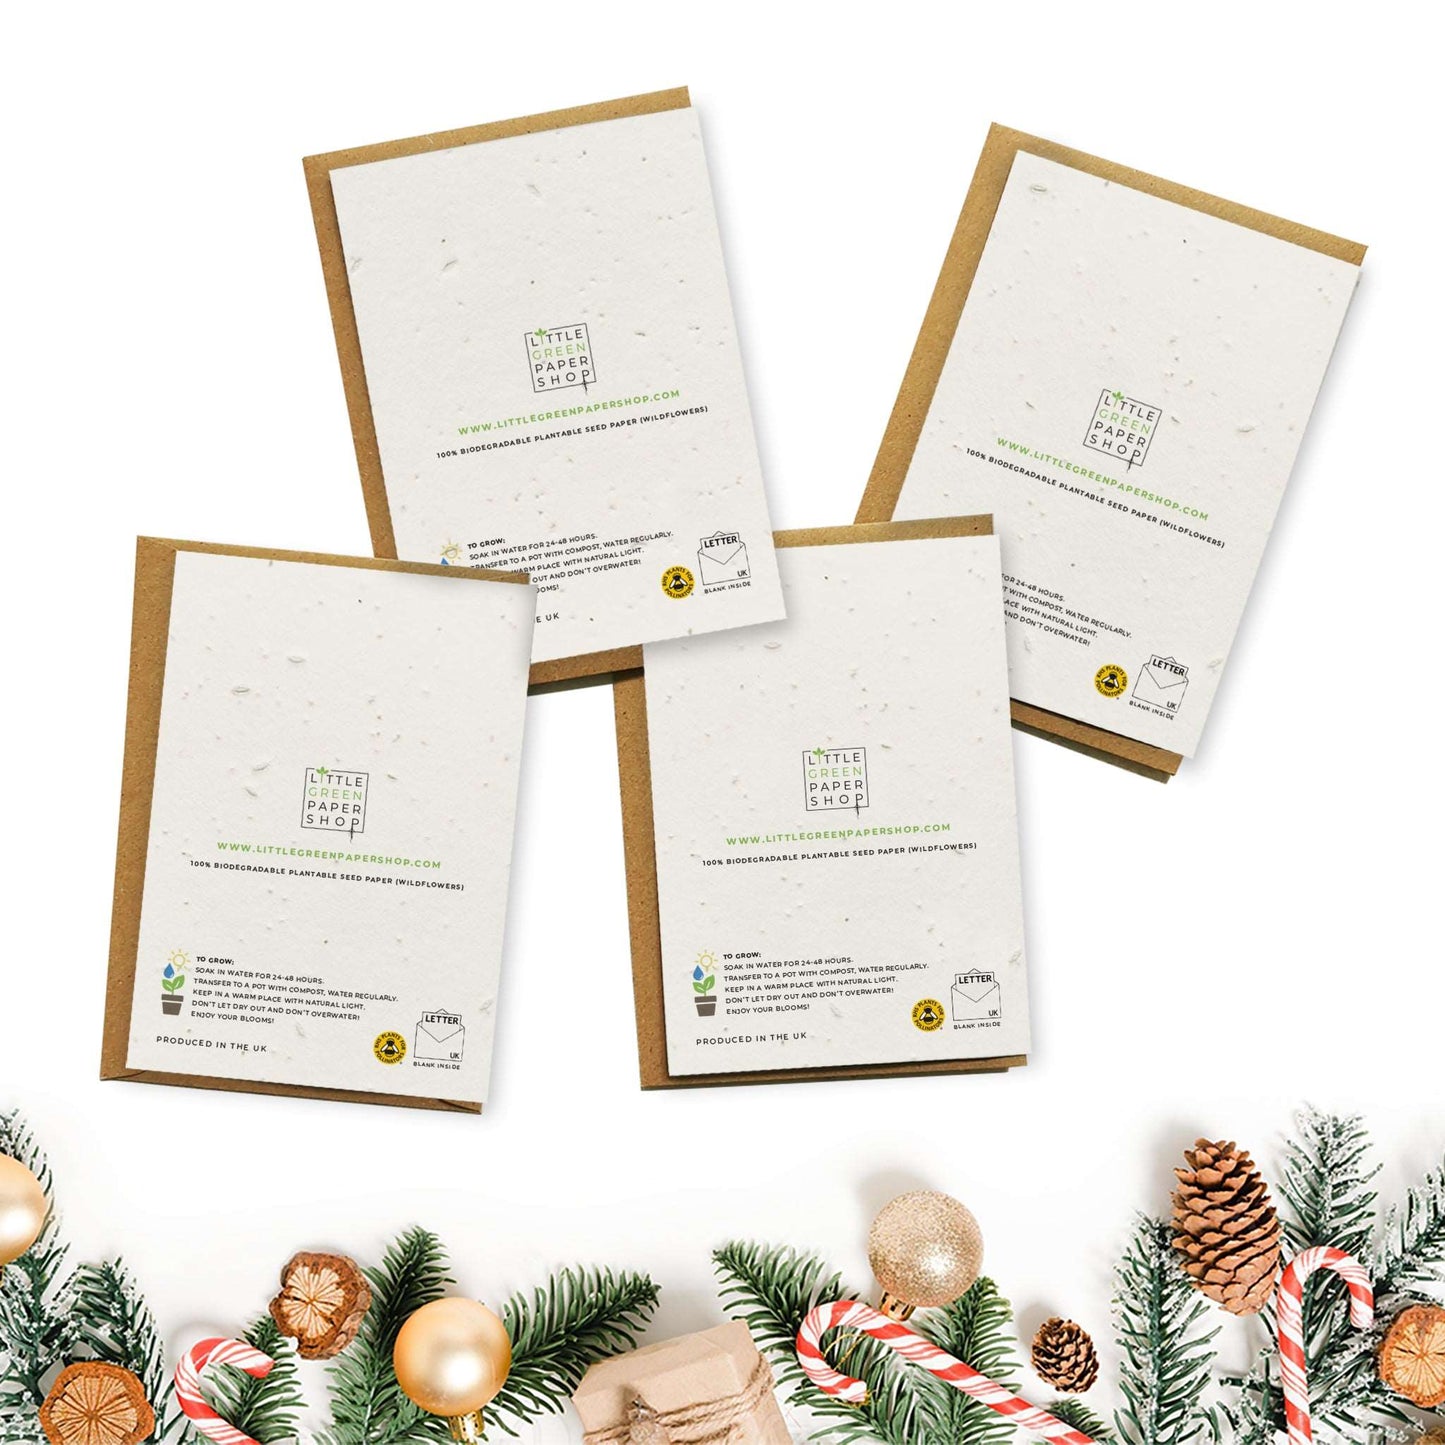 Plantable Seed Paper Christmas Cards 4-Pack - Let It Snow Greeting Card Little Green Paper Shop